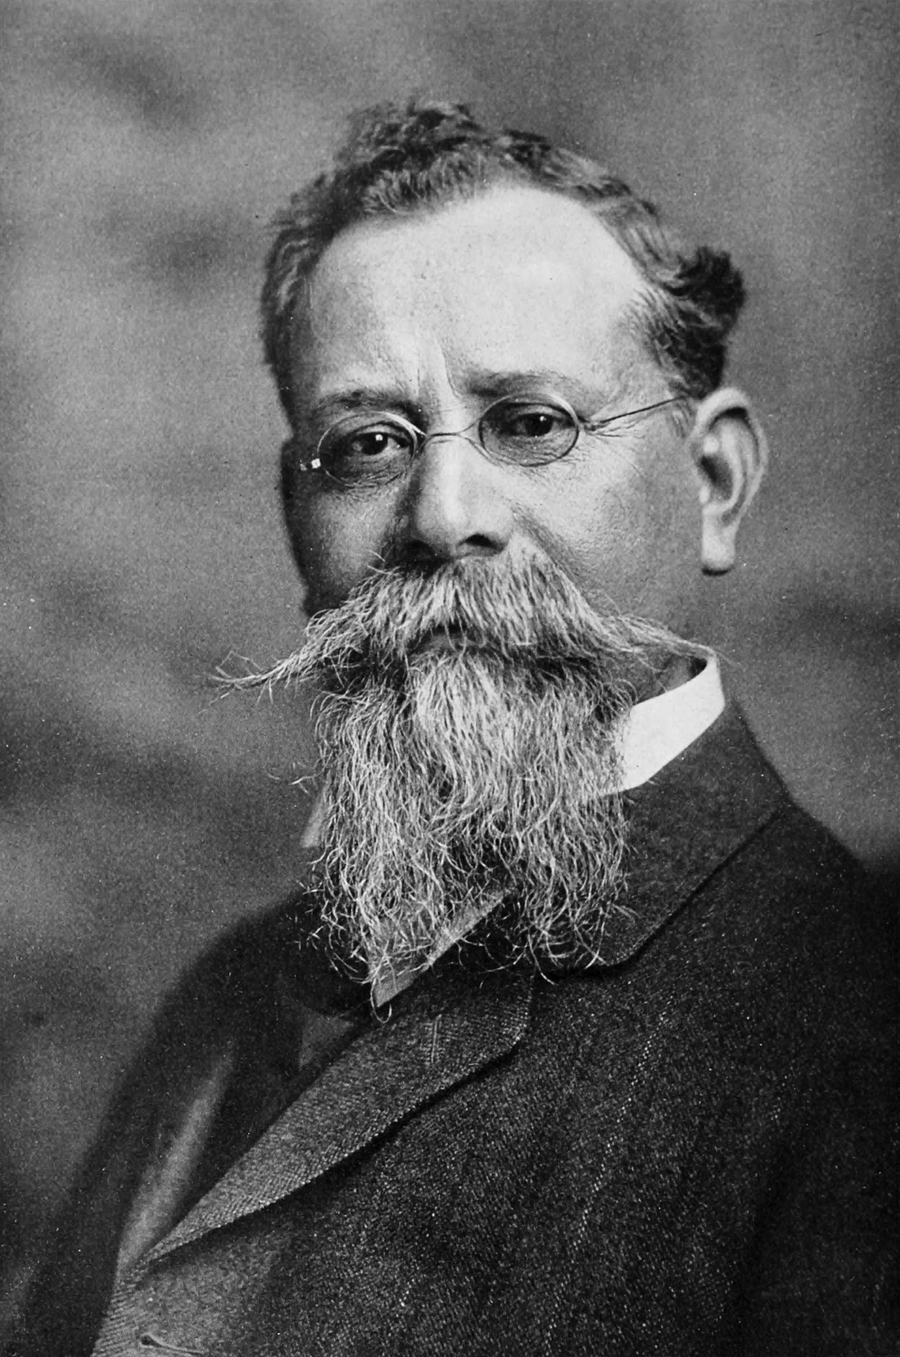 Venustiano Carranza promulgated the Agrarian Law in 1915